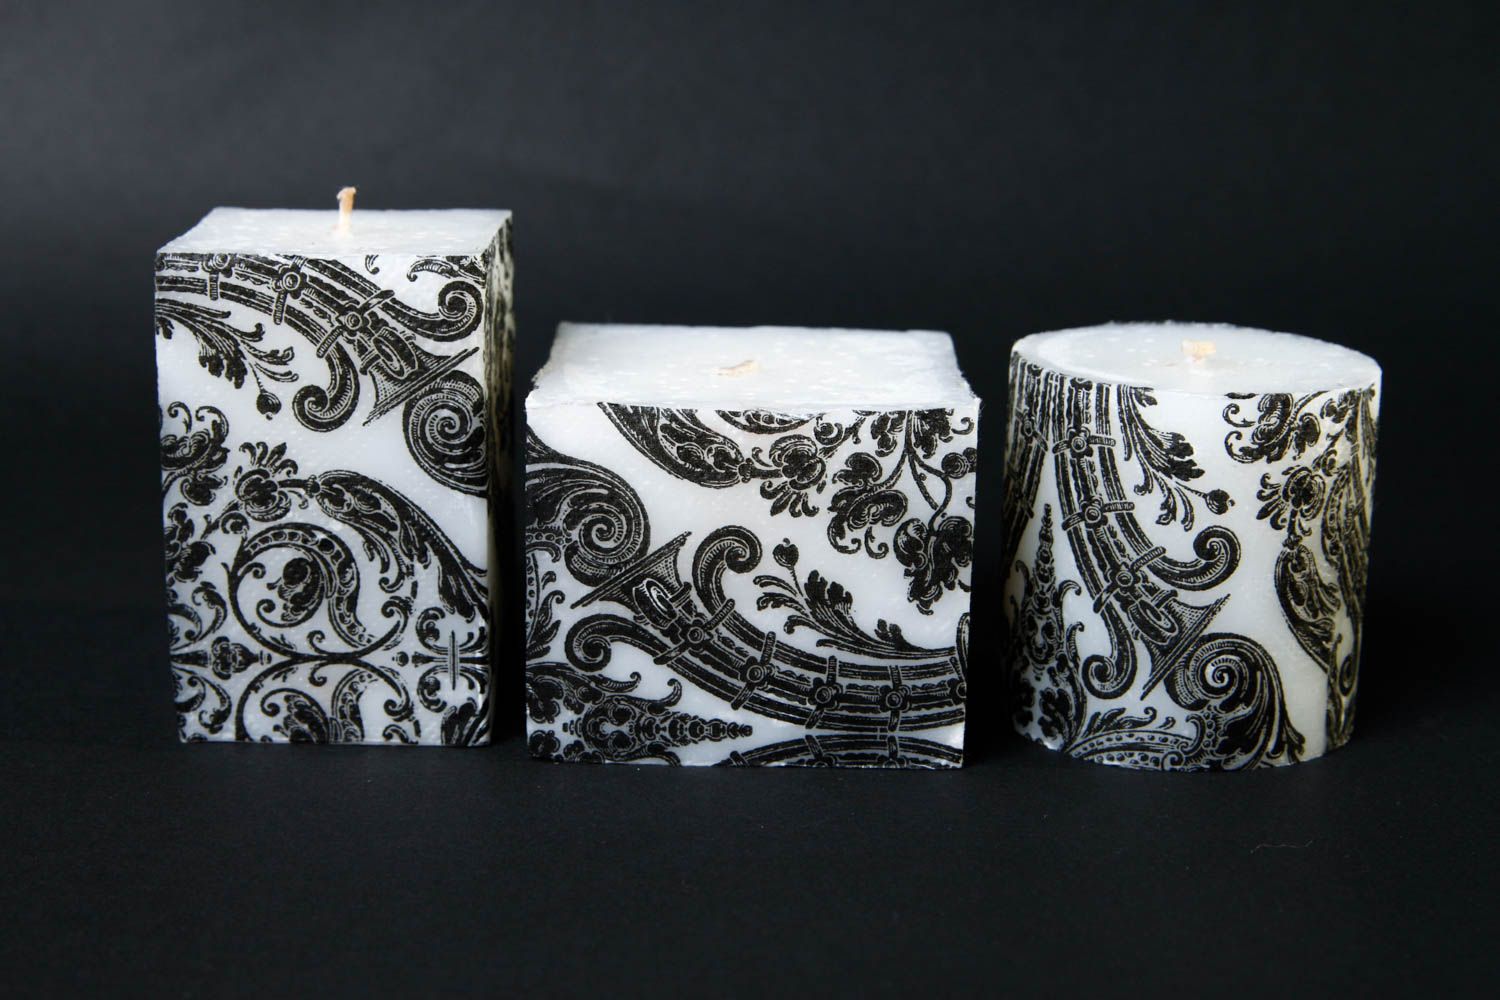 Beautiful handmade paraffin candles 3 pieces interior decorating small gifts photo 3